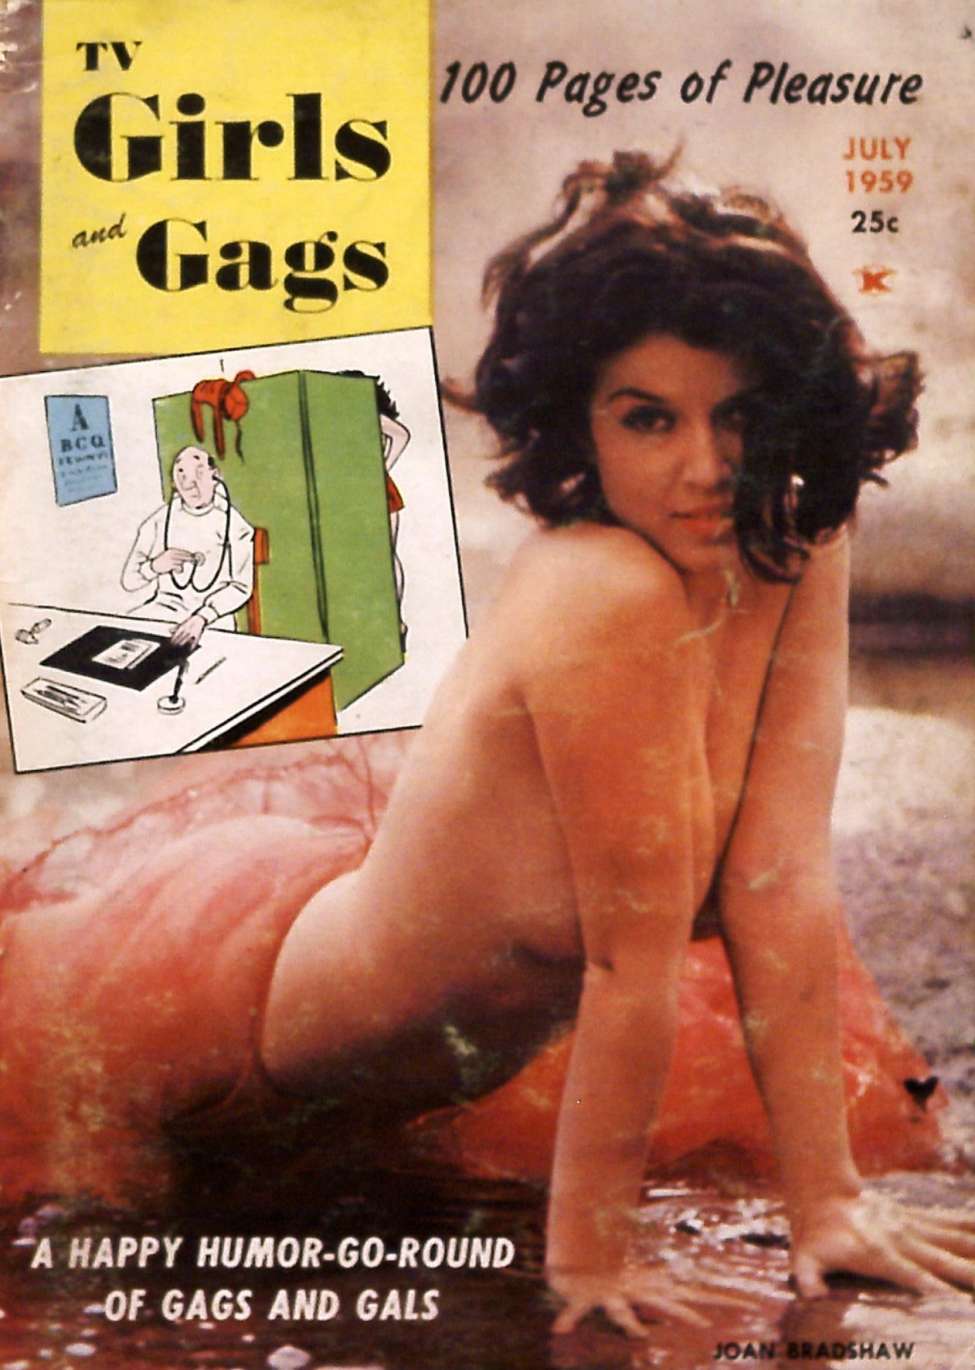 Book Cover For TV Girls and Gags v6 4